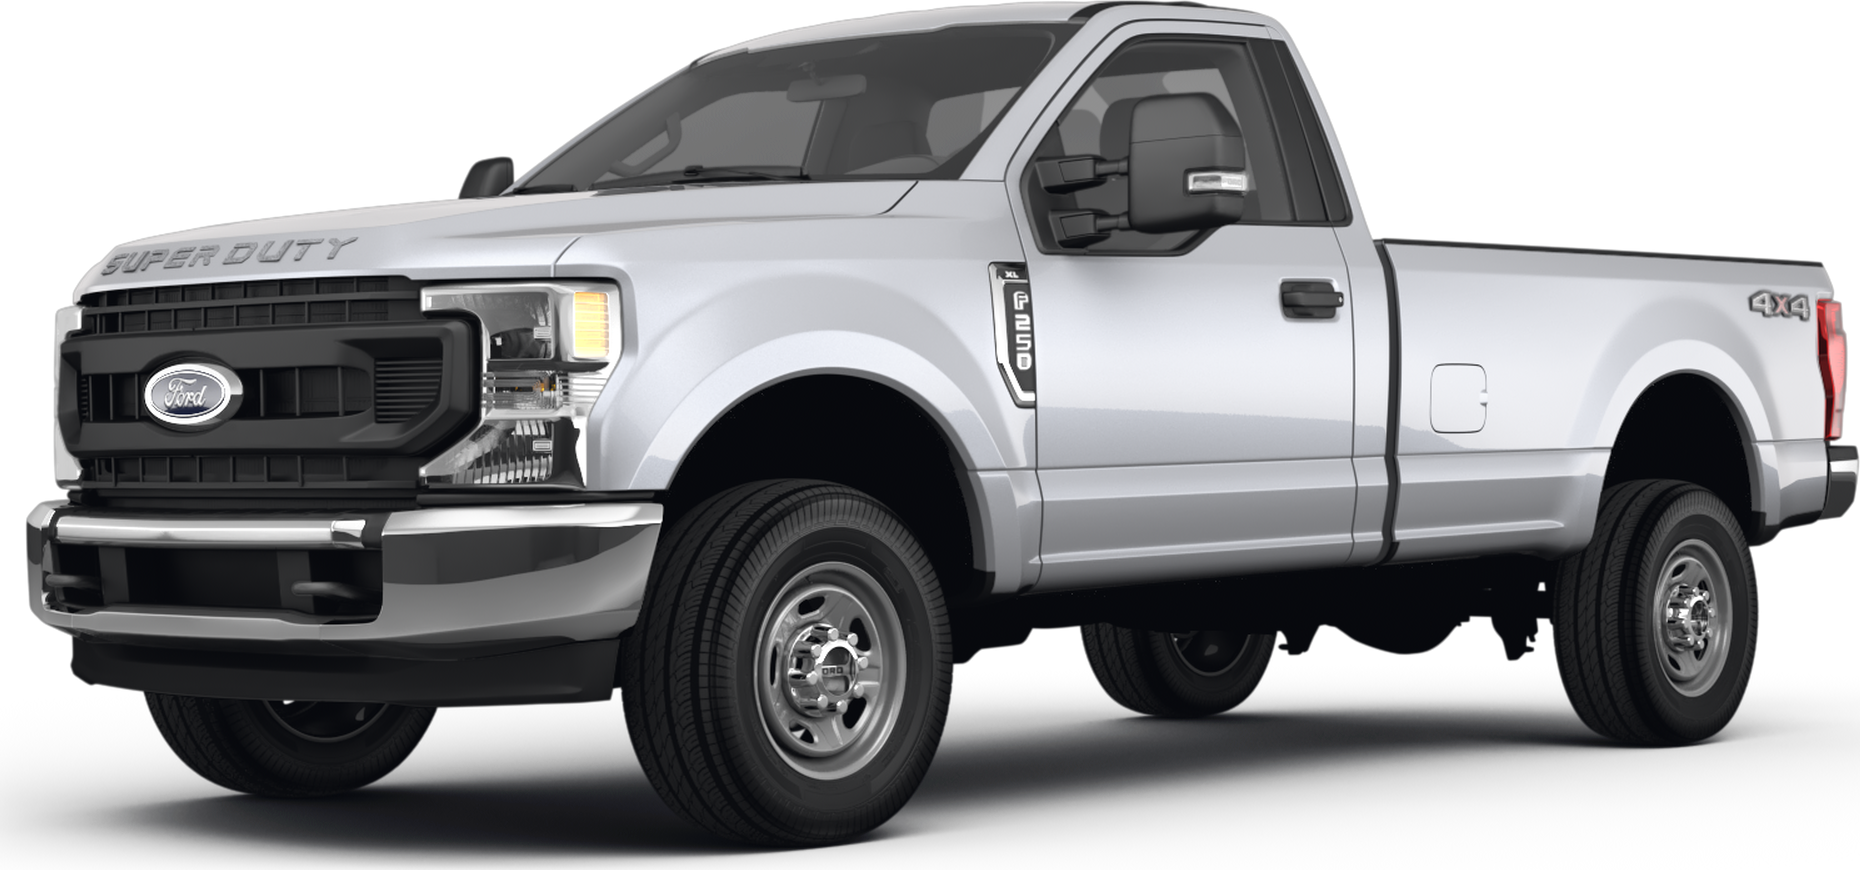 New 2023 Ford F250 Super Duty Regular Cab Reviews, Pricing & Specs